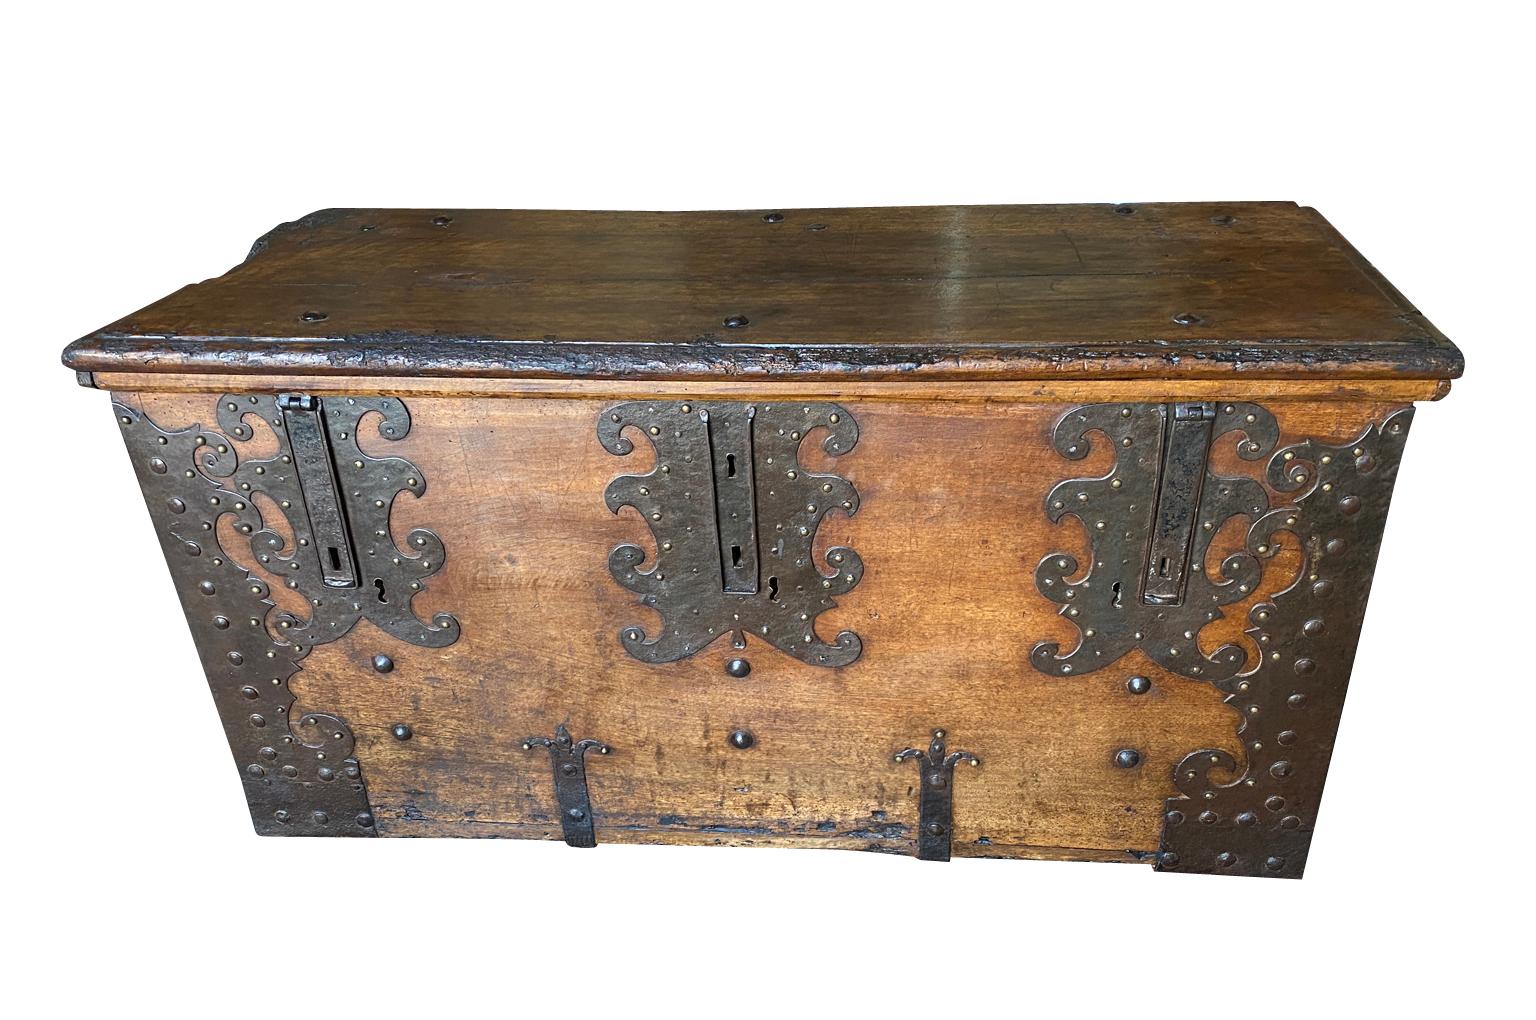 A very handsome early 17th century Trunk - Coffre Fort from the Lombardy region of Italy.  Beautifully constructed from walnut with wonderful iron hardware.  Exceptional patina.